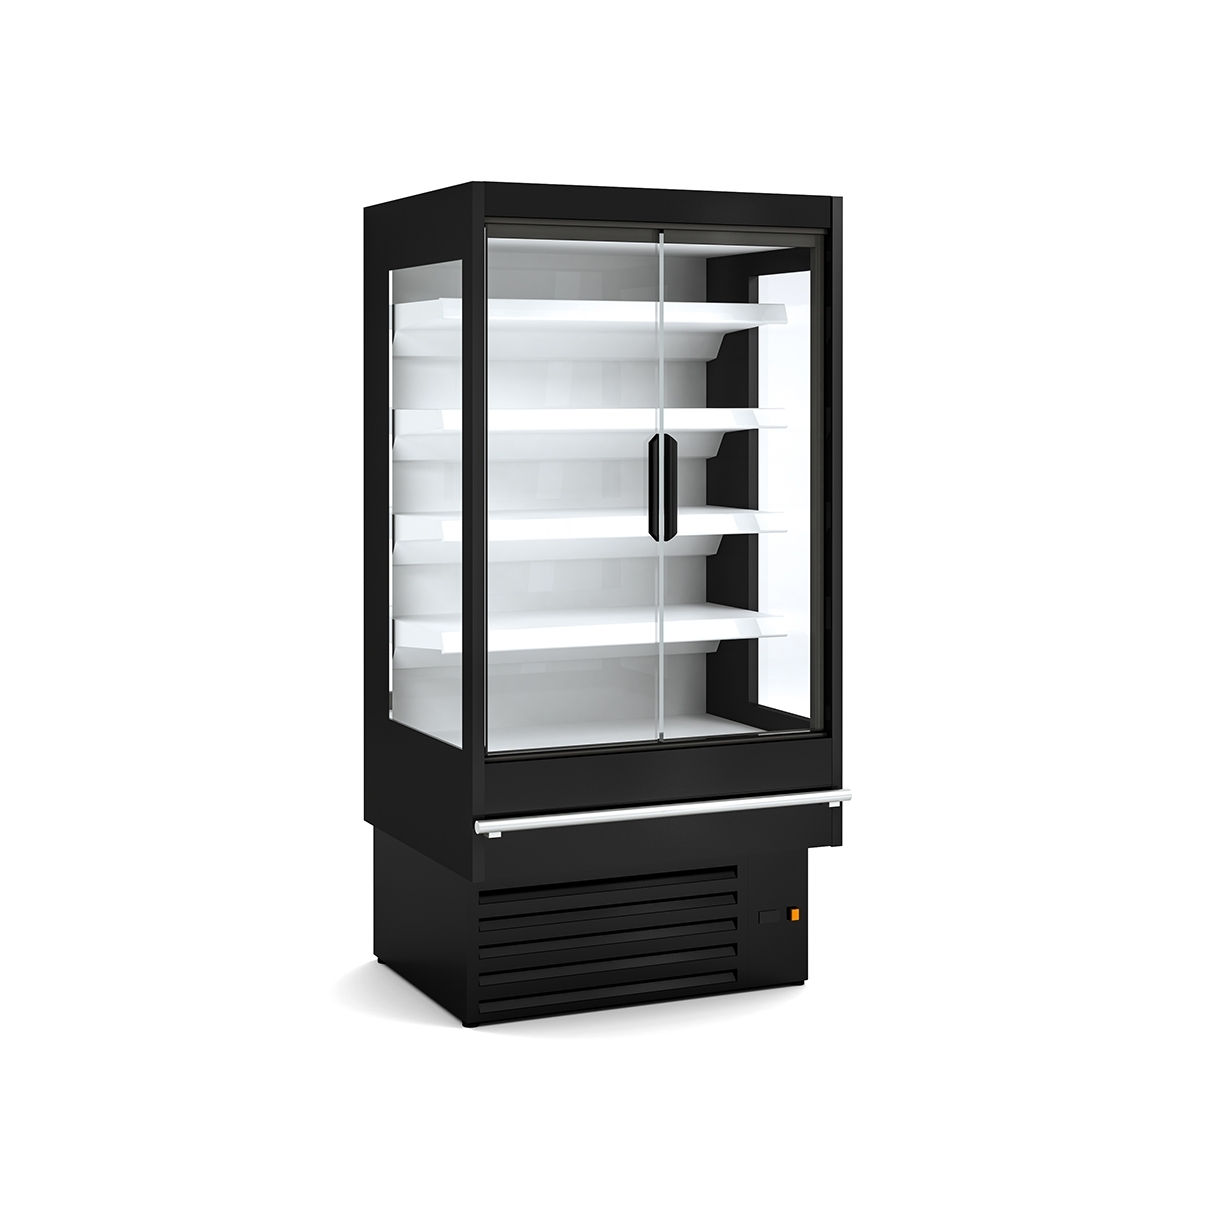 copy of REFRIGERATED WALL-MOUNTED DISPLAY CABINET HDG3 M1